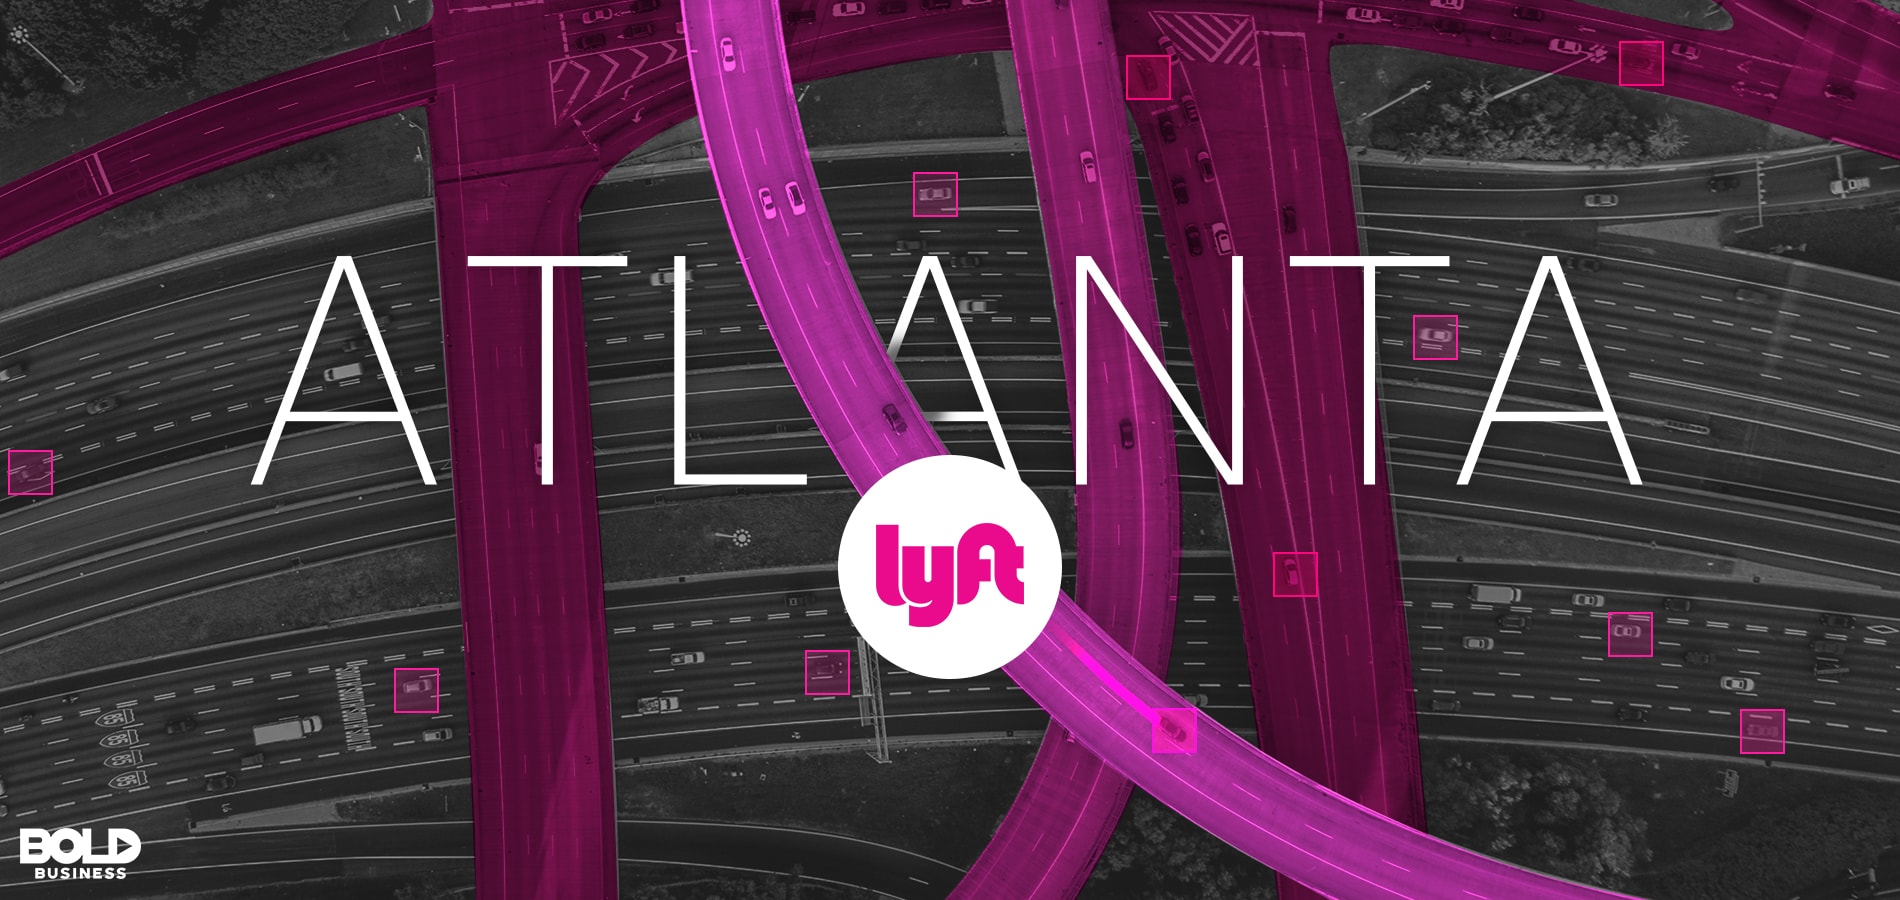 Lyft is Gaining Traction in Atlanta’s Rideshare Competition